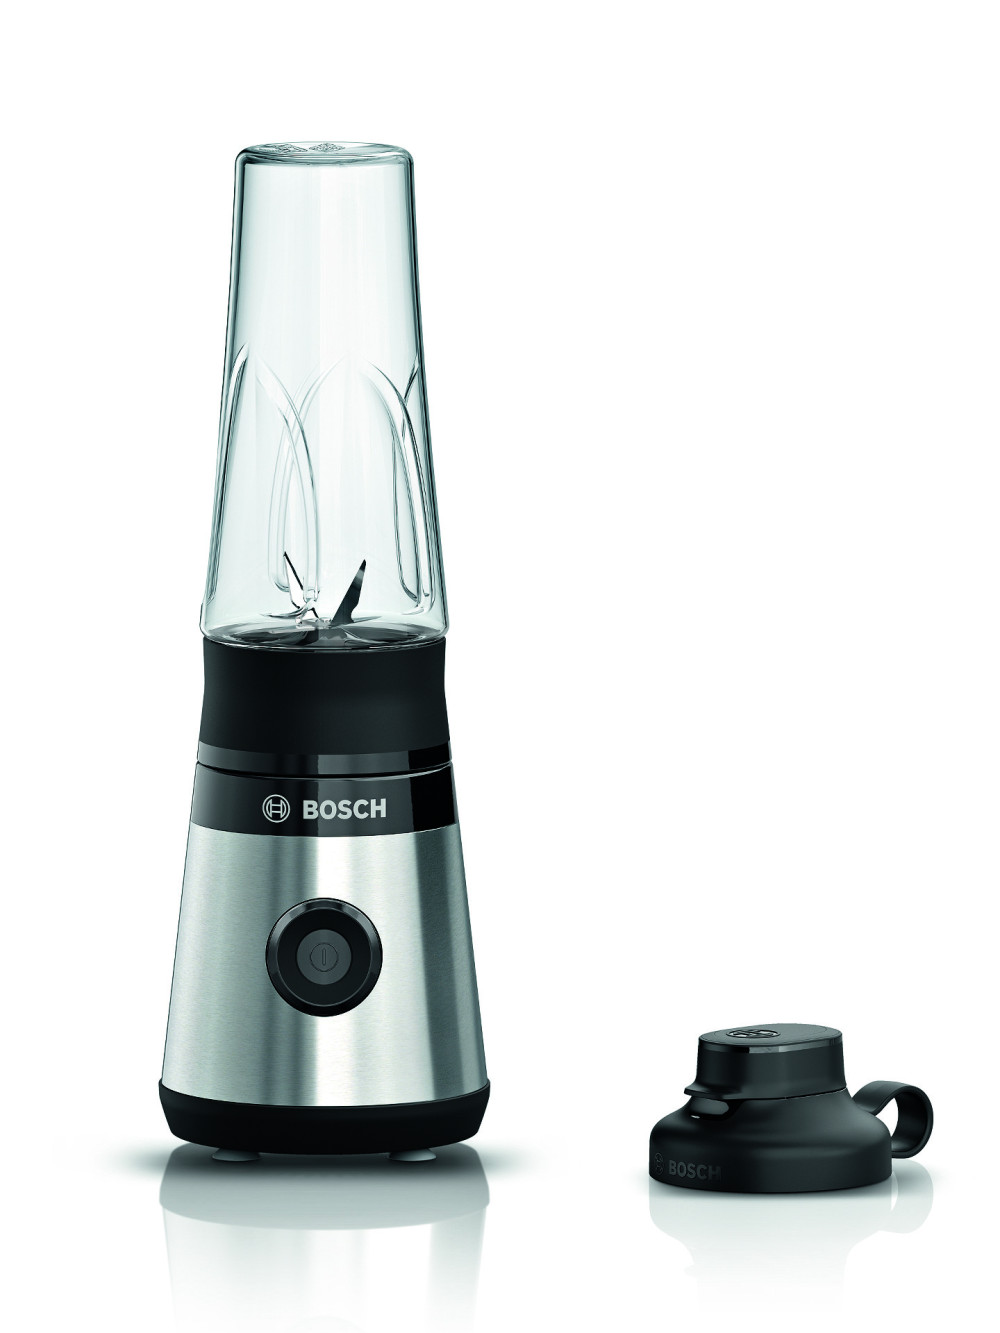 Bosch MMB2111MG VitaPower Serie 2 450 W Smoothie Maker featured image